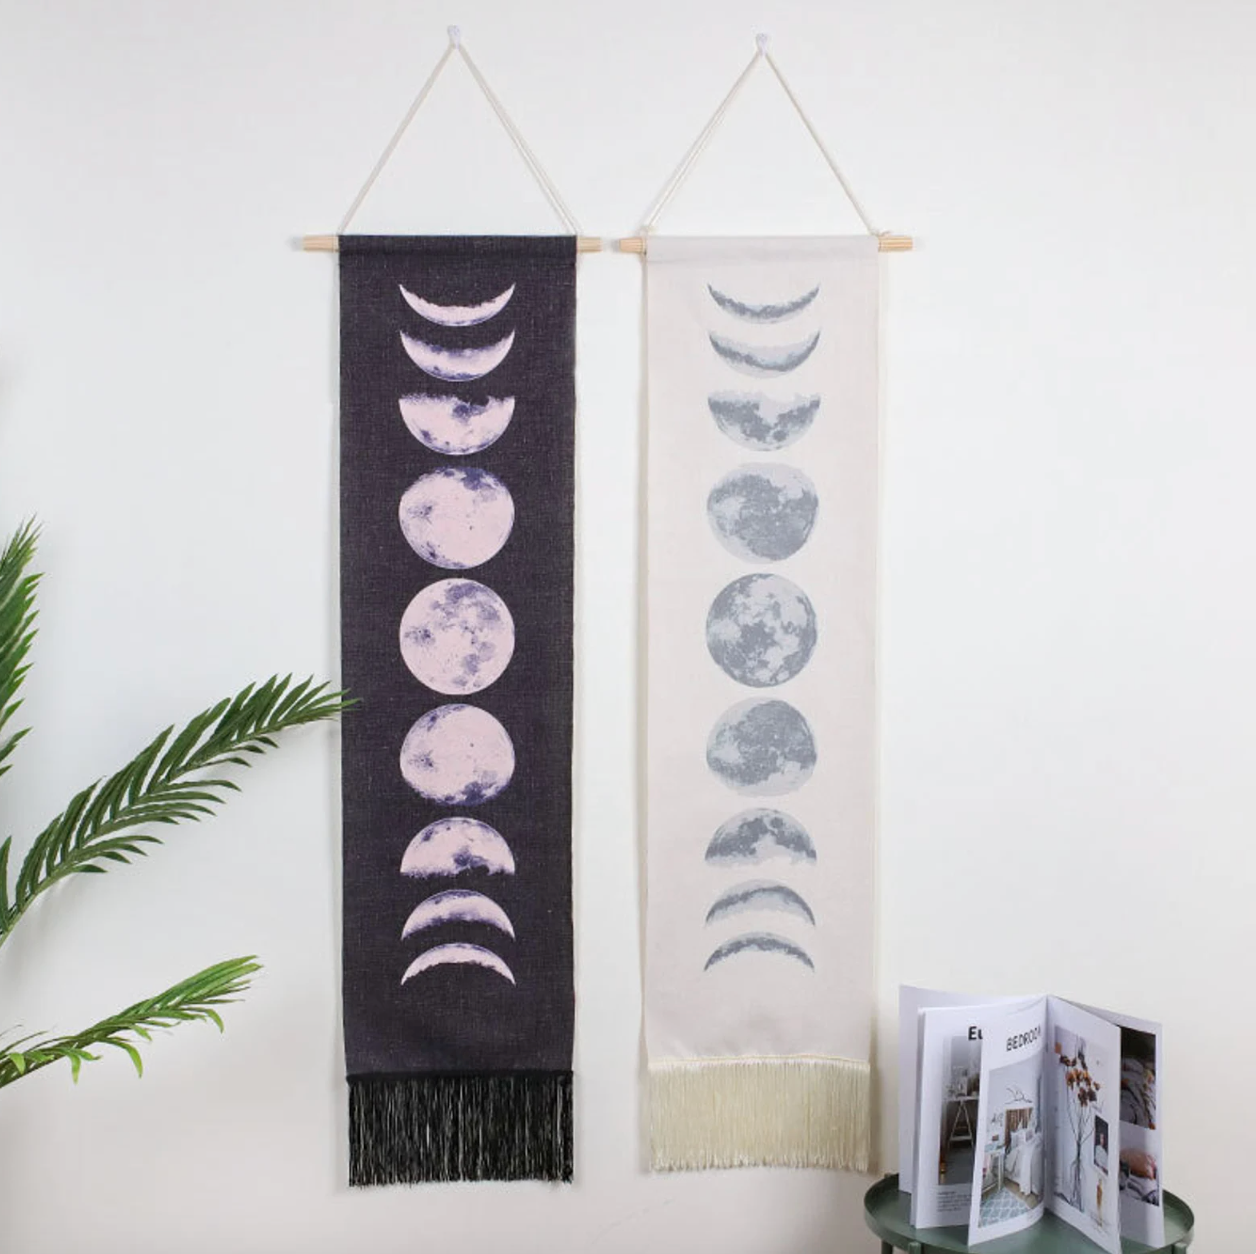 Handmade tapestry "Moonphases"